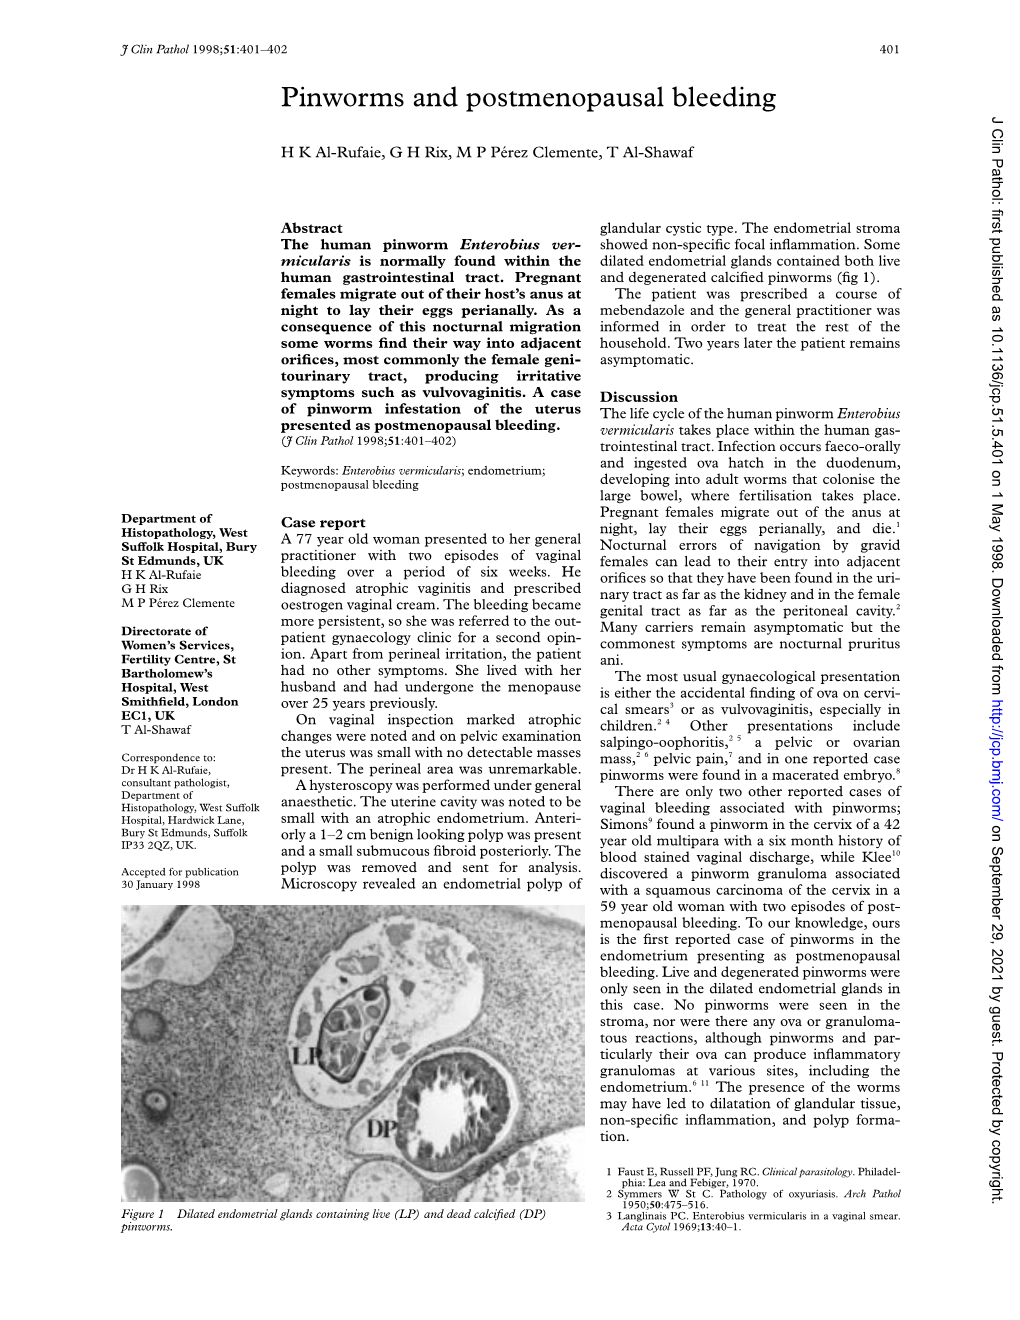 Pinworms and Postmenopausal Bleeding J Clin Pathol: First Published As 10.1136/Jcp.51.5.401 on 1 May 1998